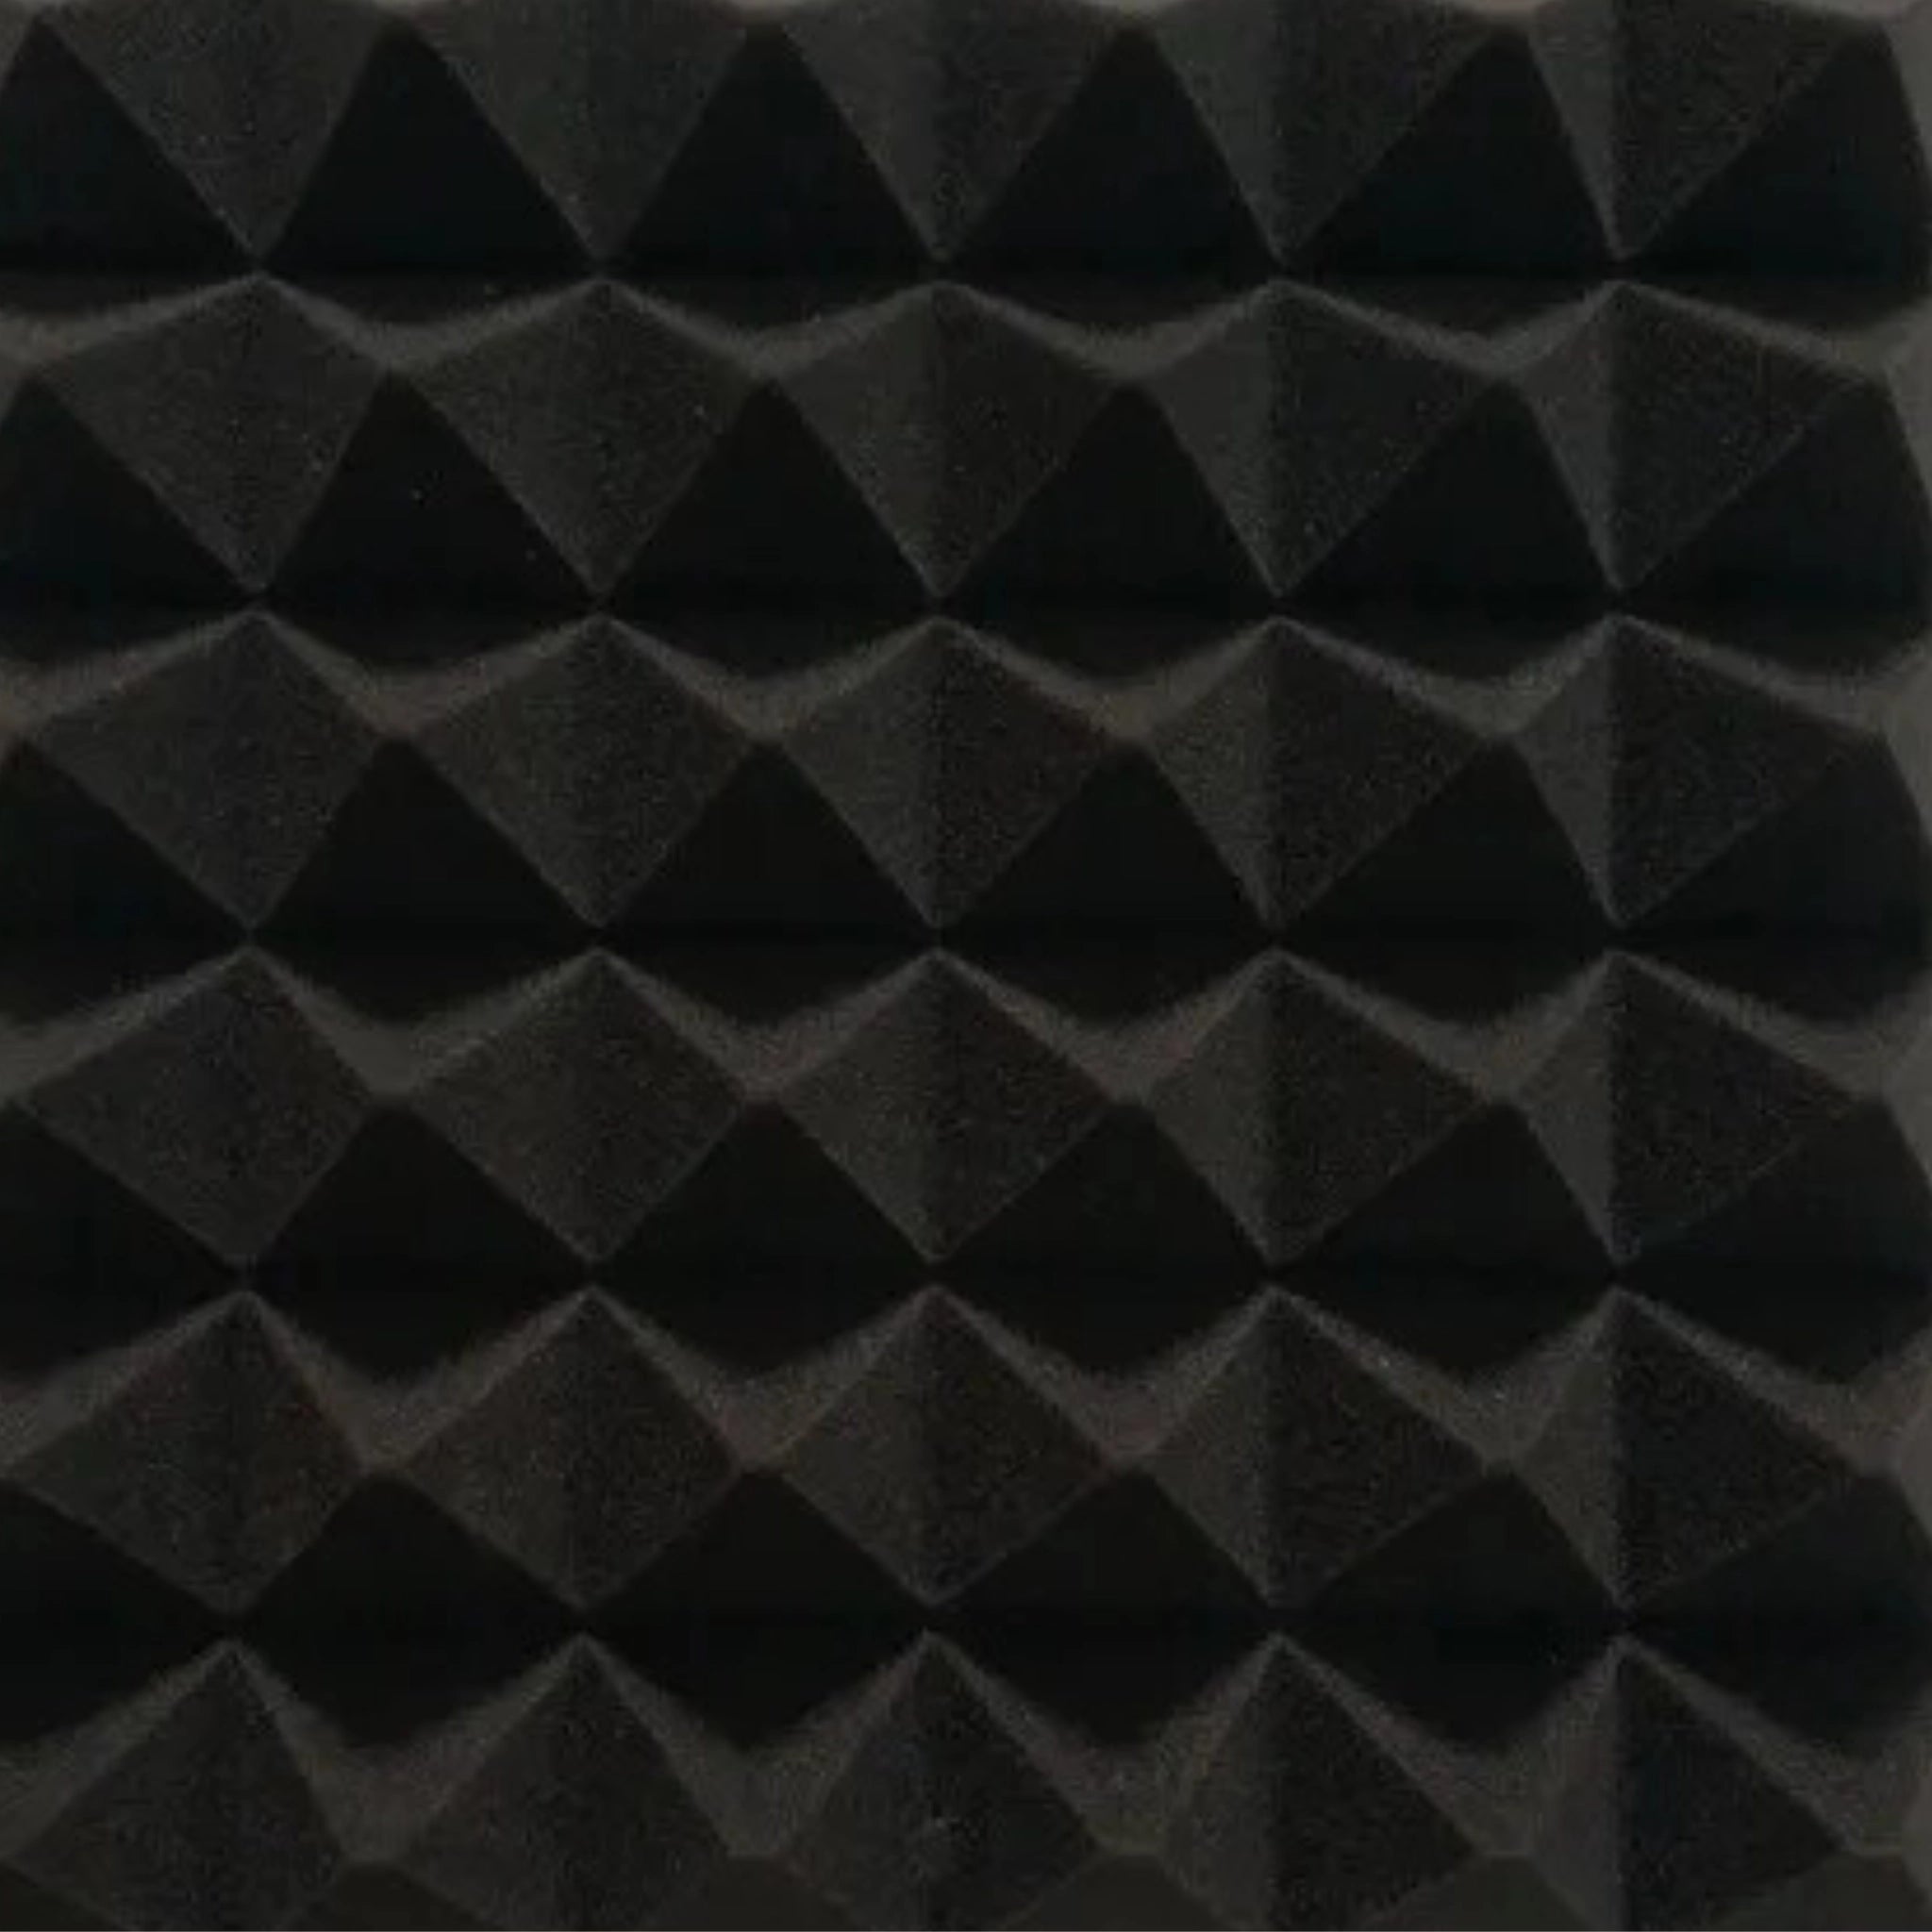 Close-up of black acoustic foam panel with pyramid texture